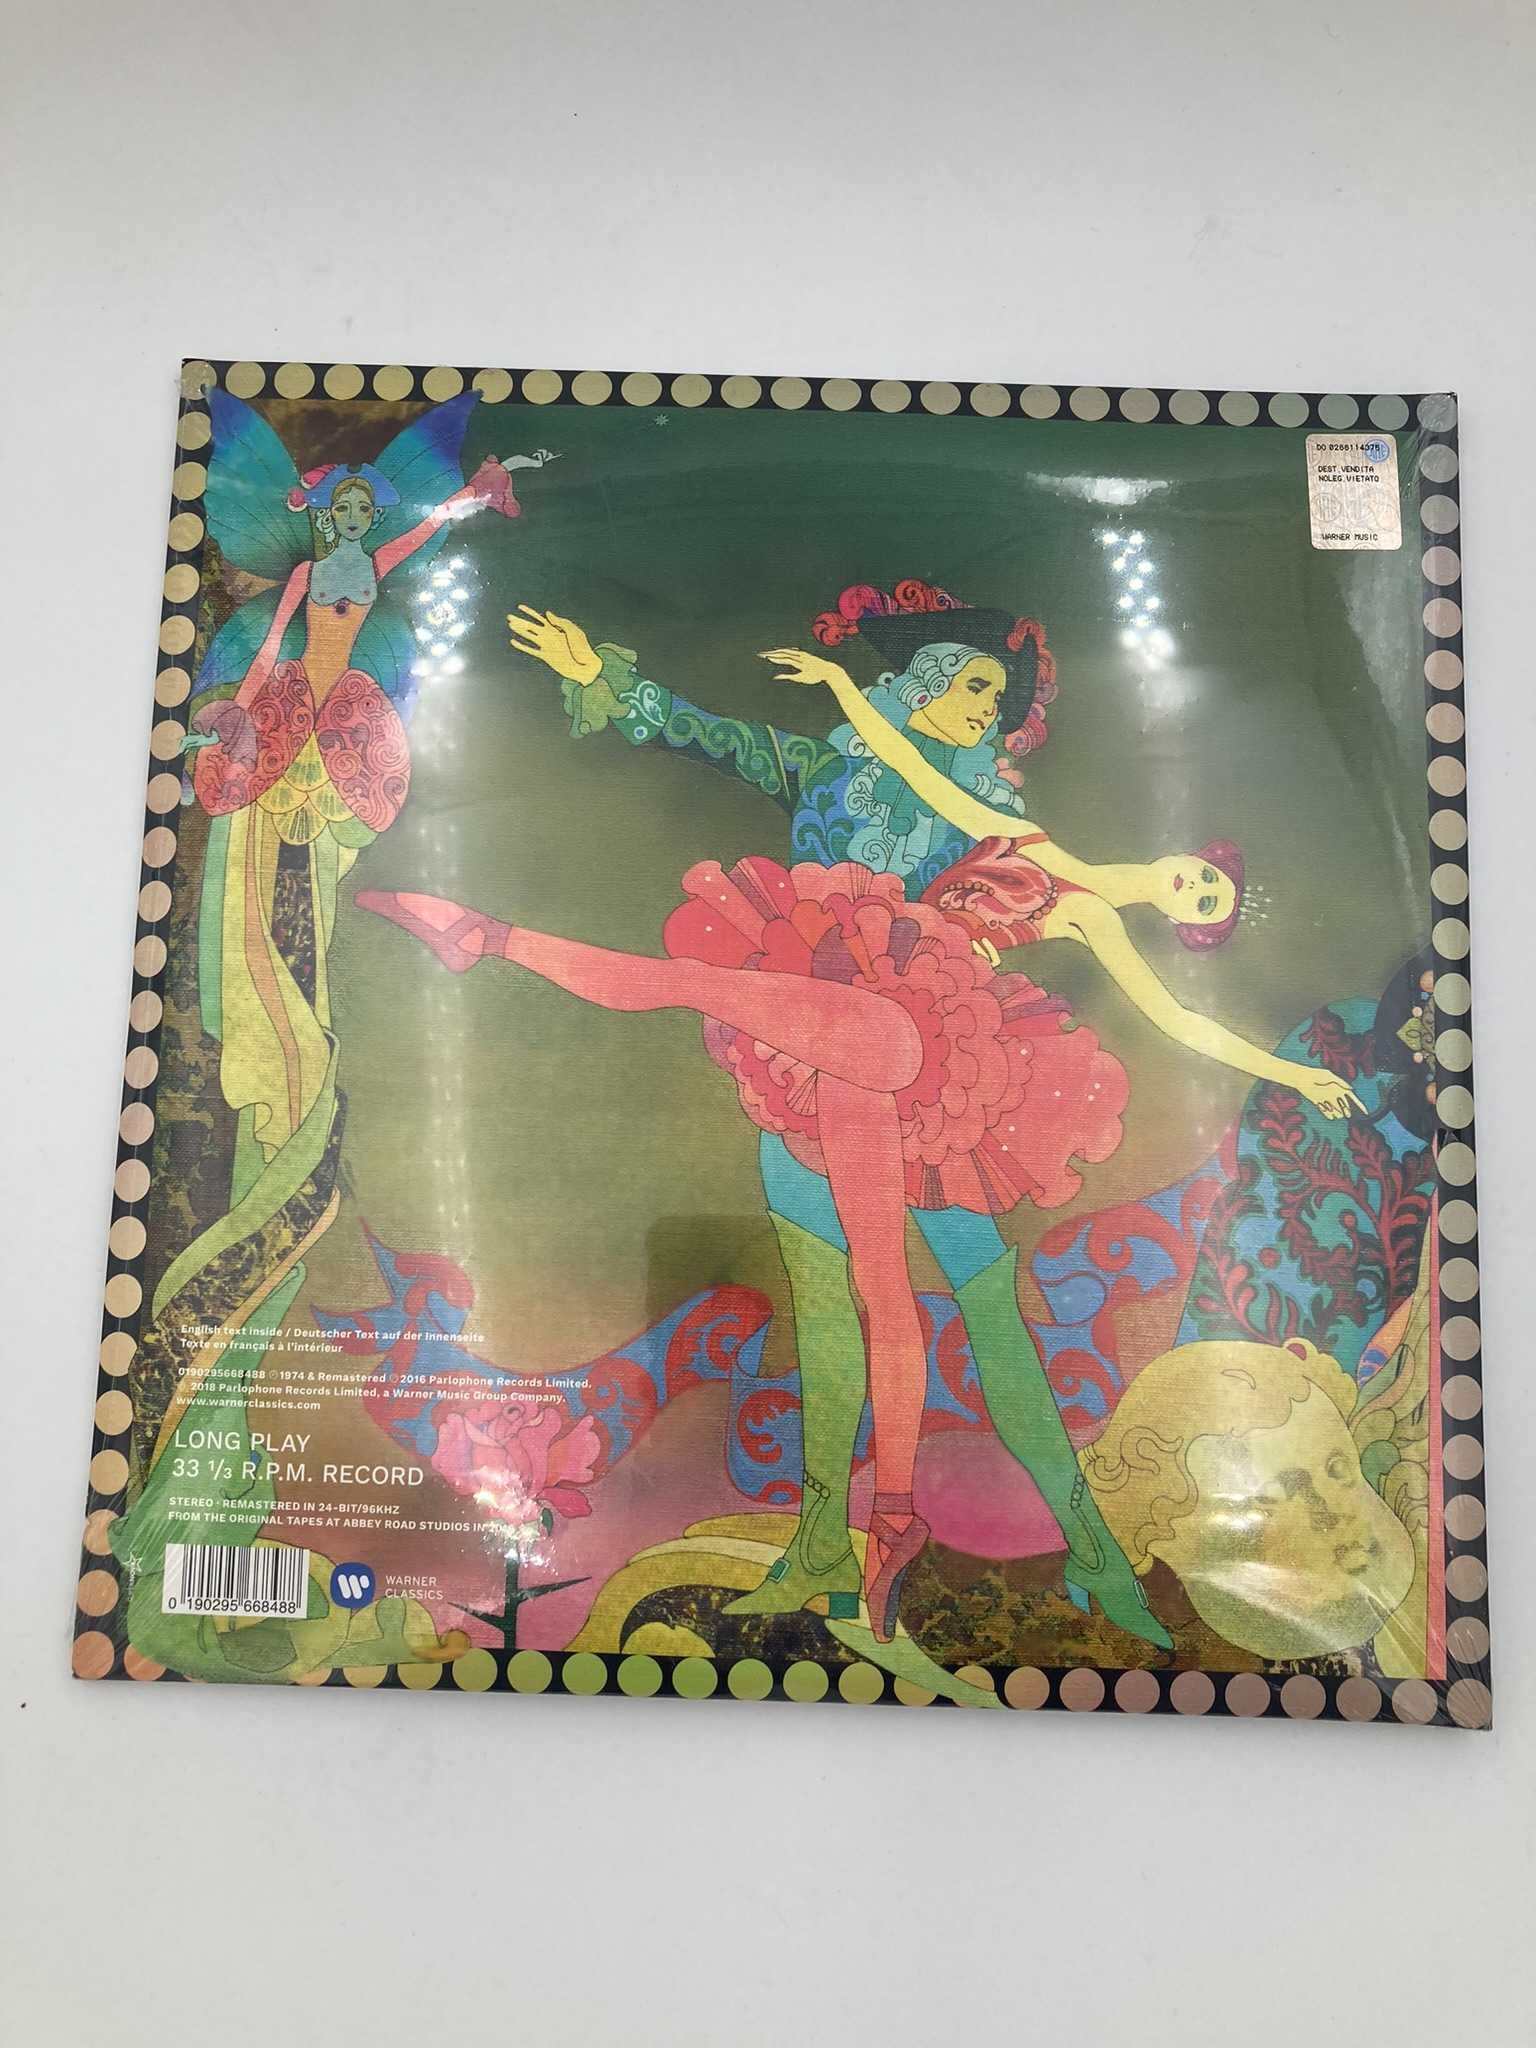 Andre Previn: Tchaikovsky: The Sleeping Beauty 3 LP